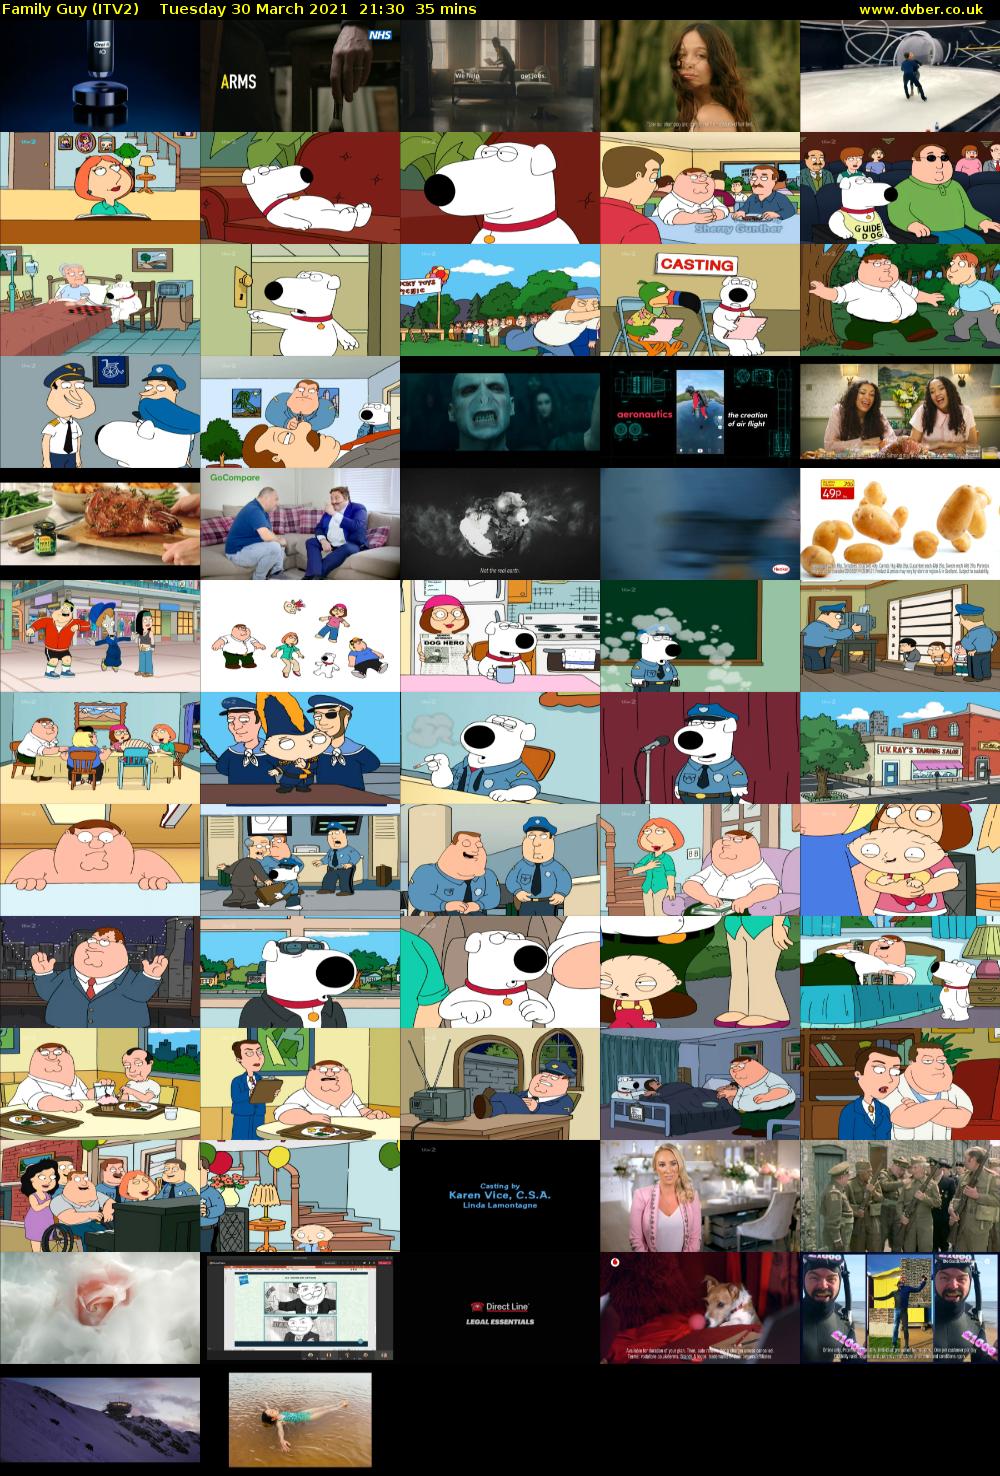 Family Guy (ITV2) Tuesday 30 March 2021 21:30 - 22:05